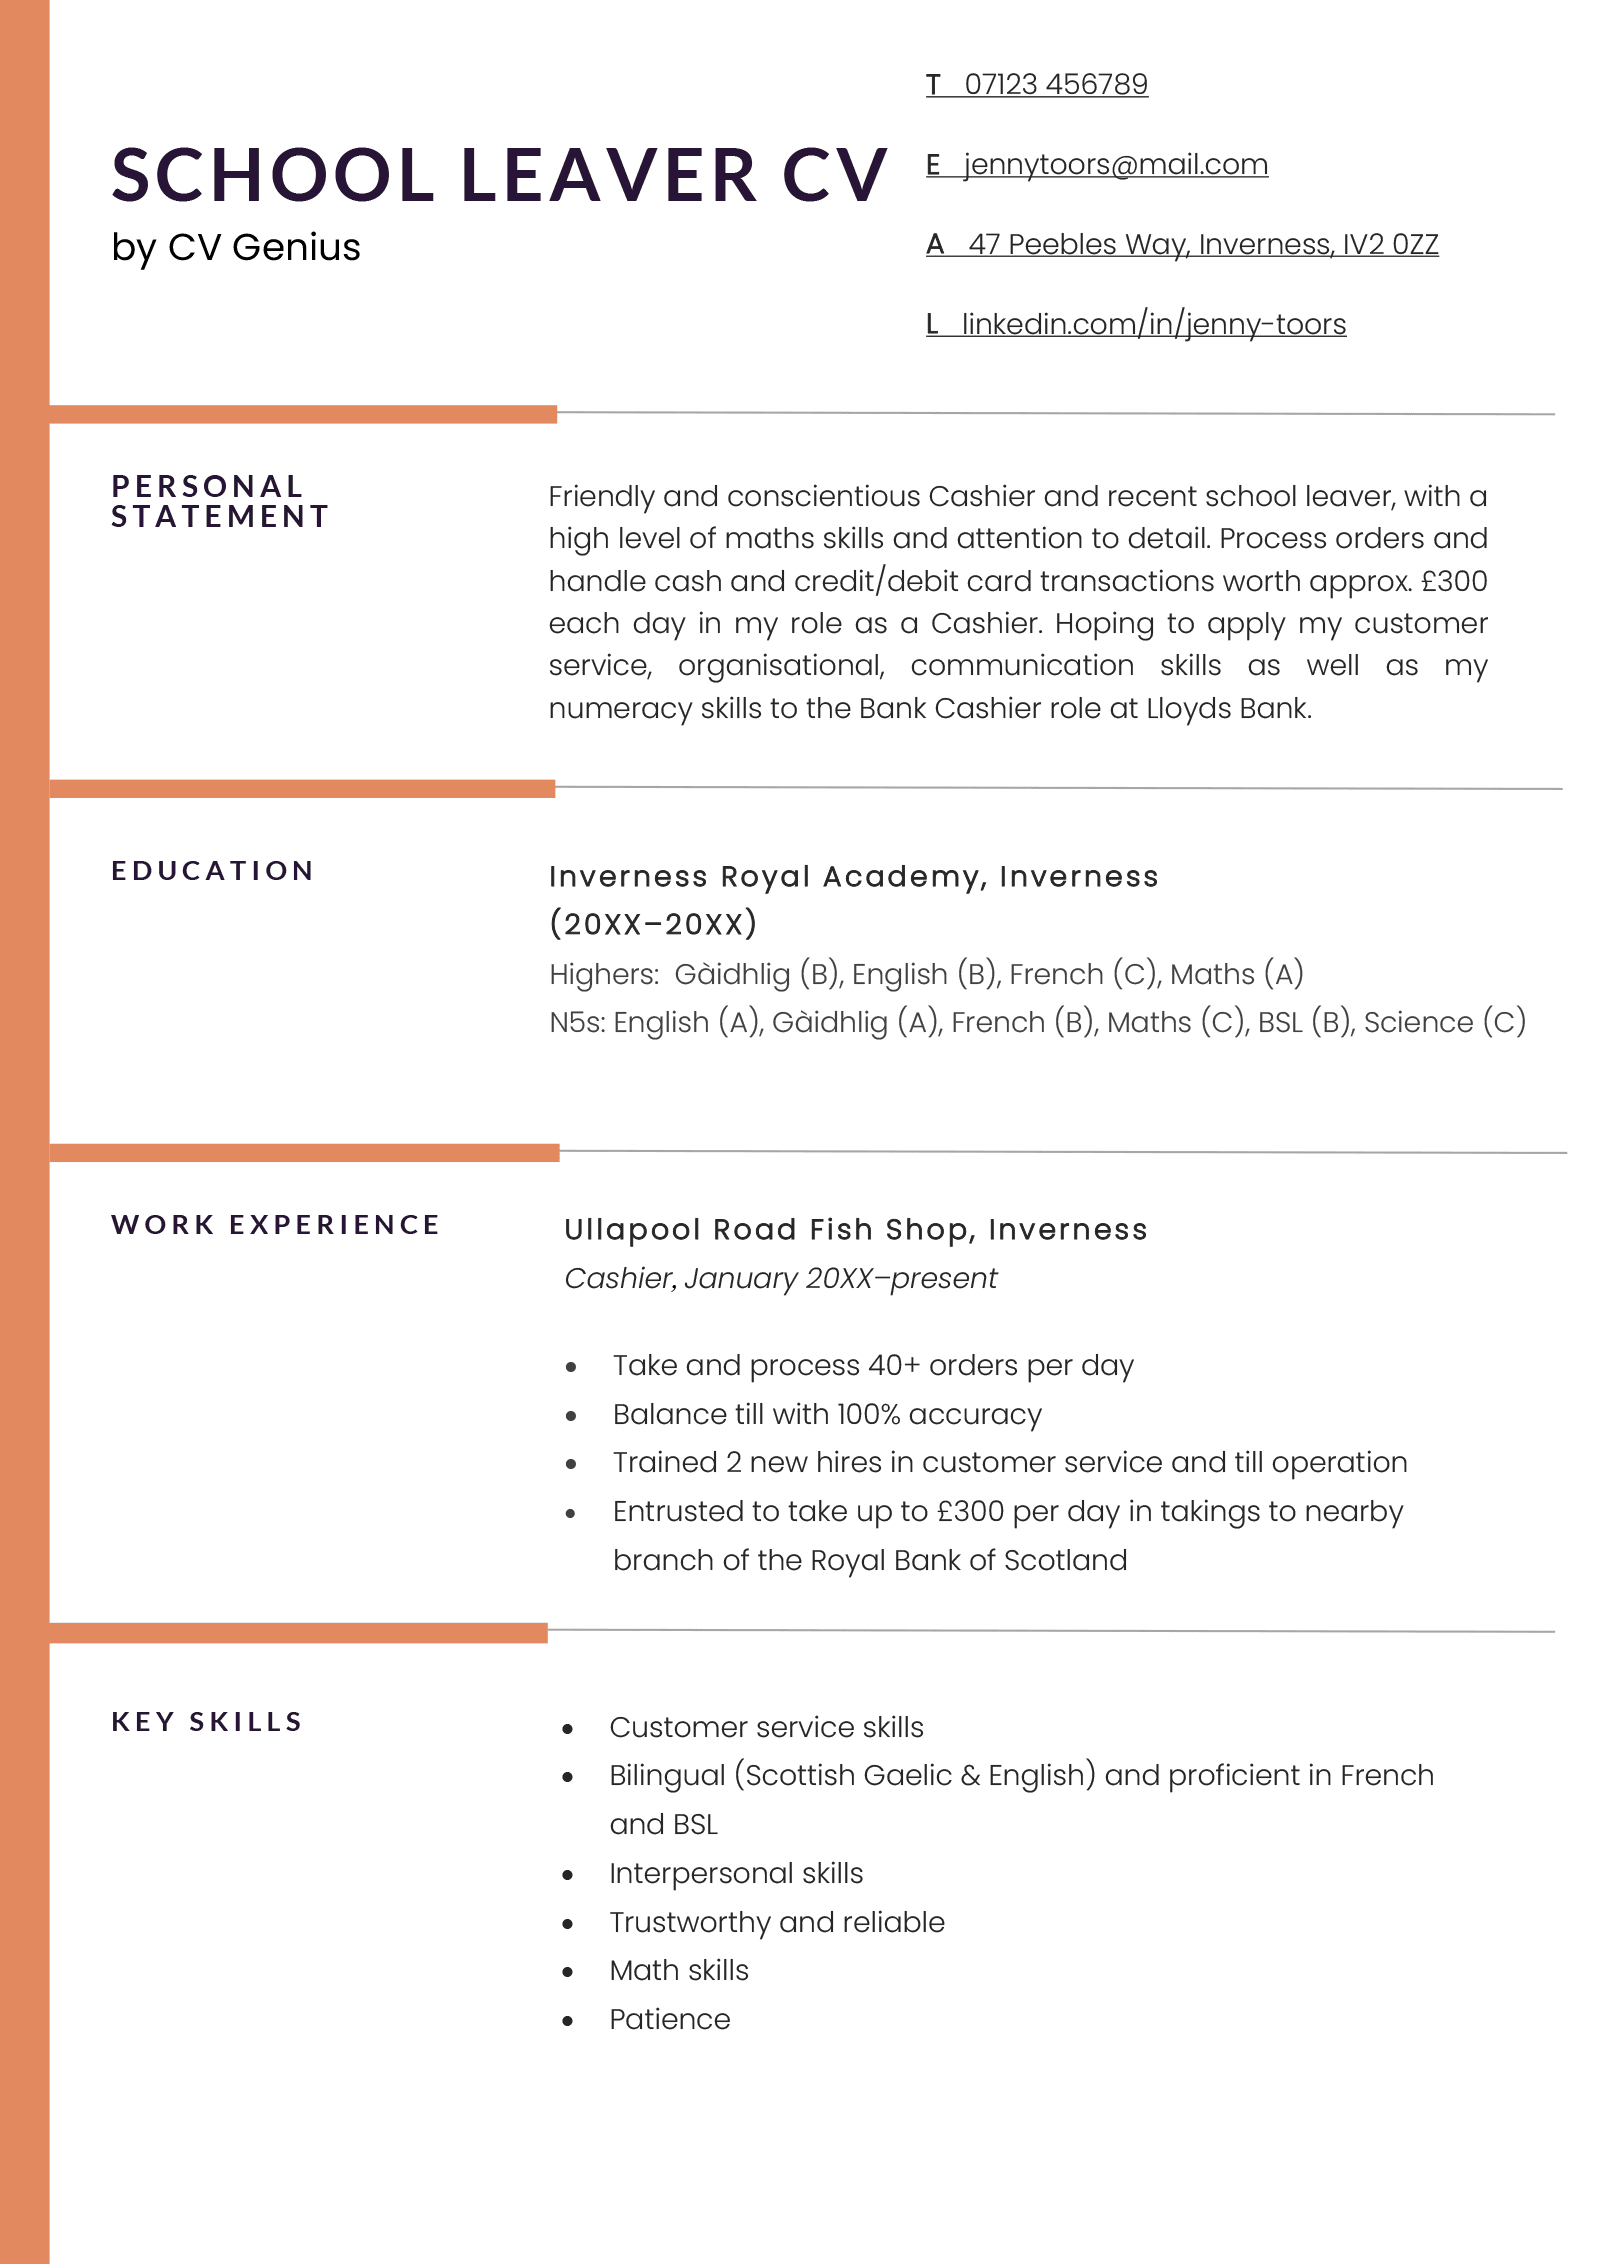 School Leaver CV Example with Work Experience